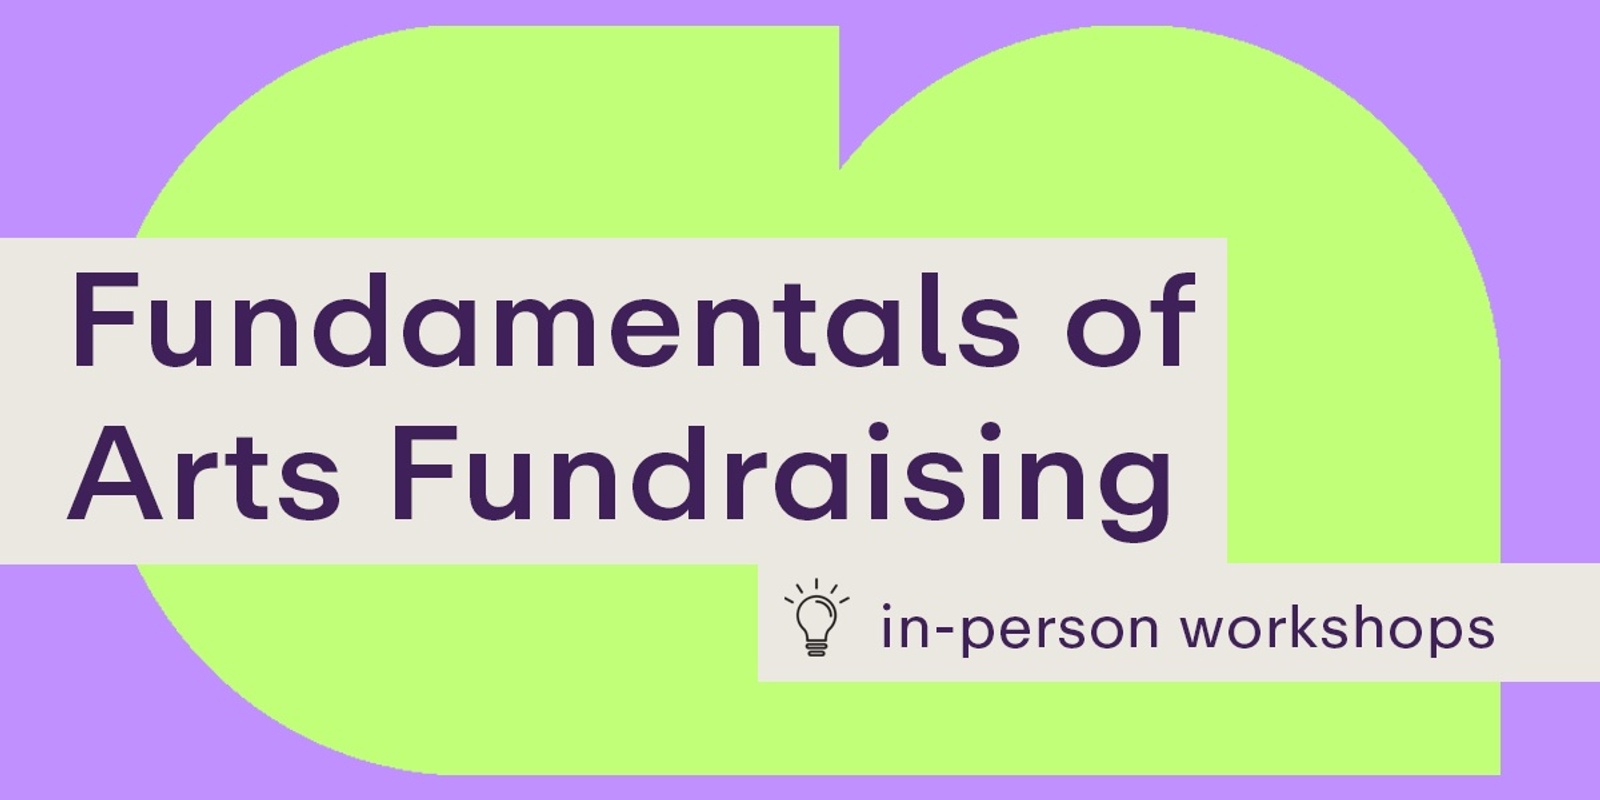 Banner image for The Fundamentals of Arts Fundraising | Melbourne